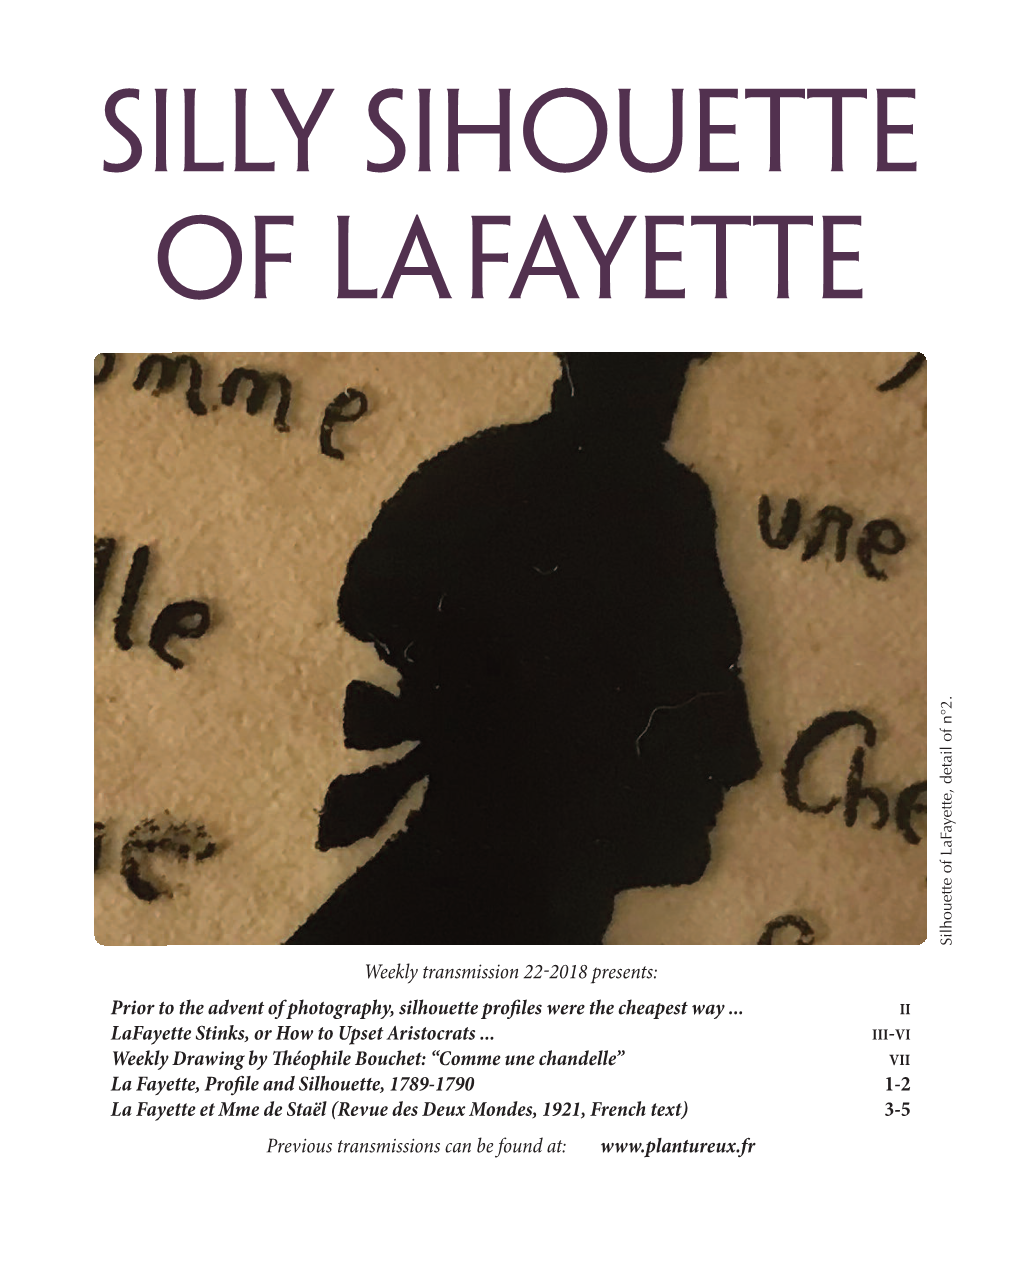 Silly Sihouette of Lafayette